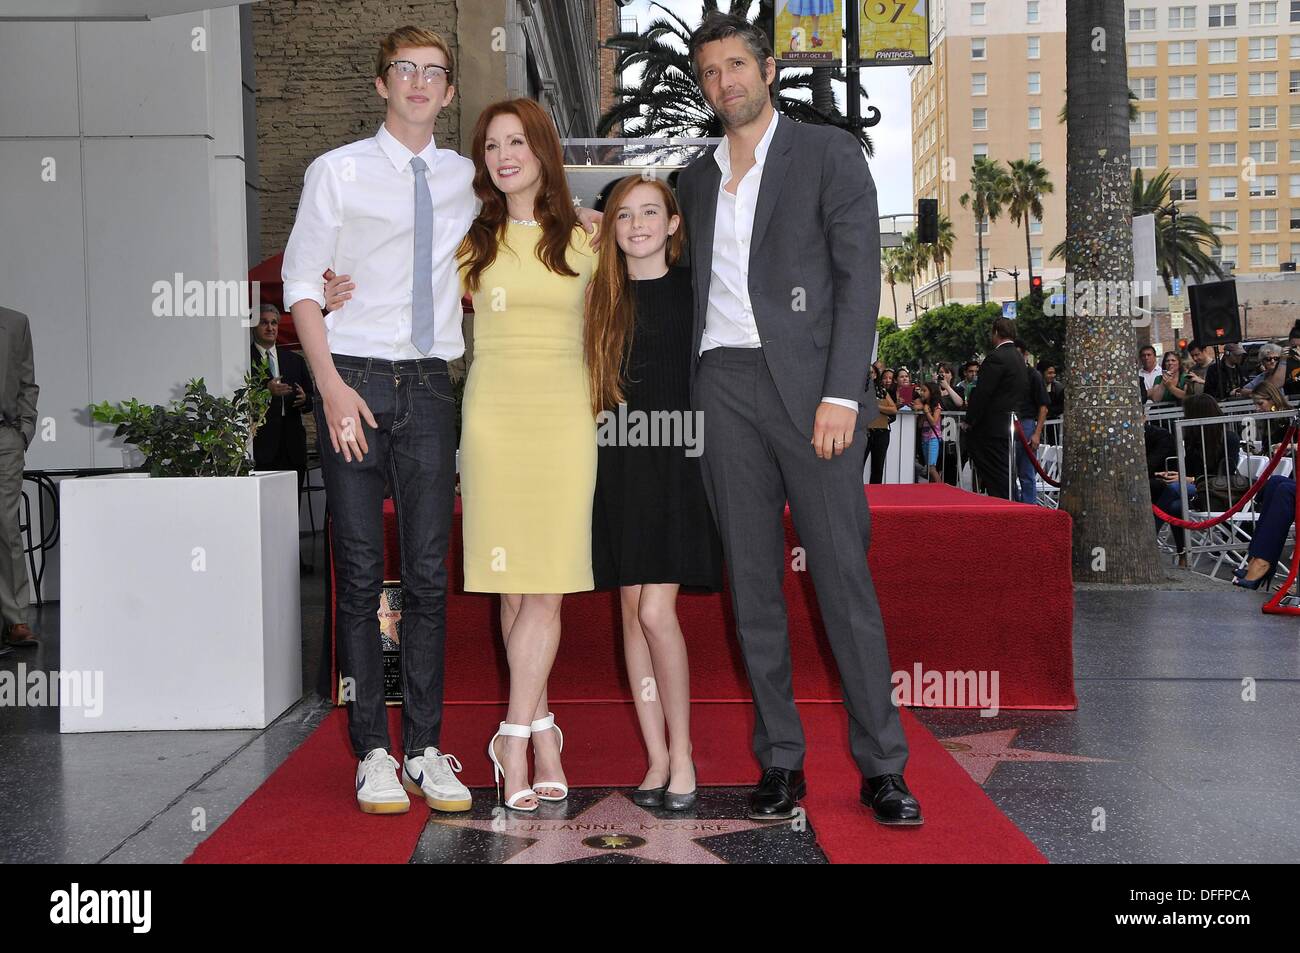 Los Angeles, CA. 3rd Oct, 2013. Caleb Freundlich, Julianne Moore, Liv Freundlich, Bart Freundlich at the induction ceremony for Star on the Hollywood Walk of Fame for Julianne Moore, Hollywood Boulevard, Los Angeles, CA October 3, 2013. © Michael Germana/Everett Collection/Alamy Live News Stock Photo